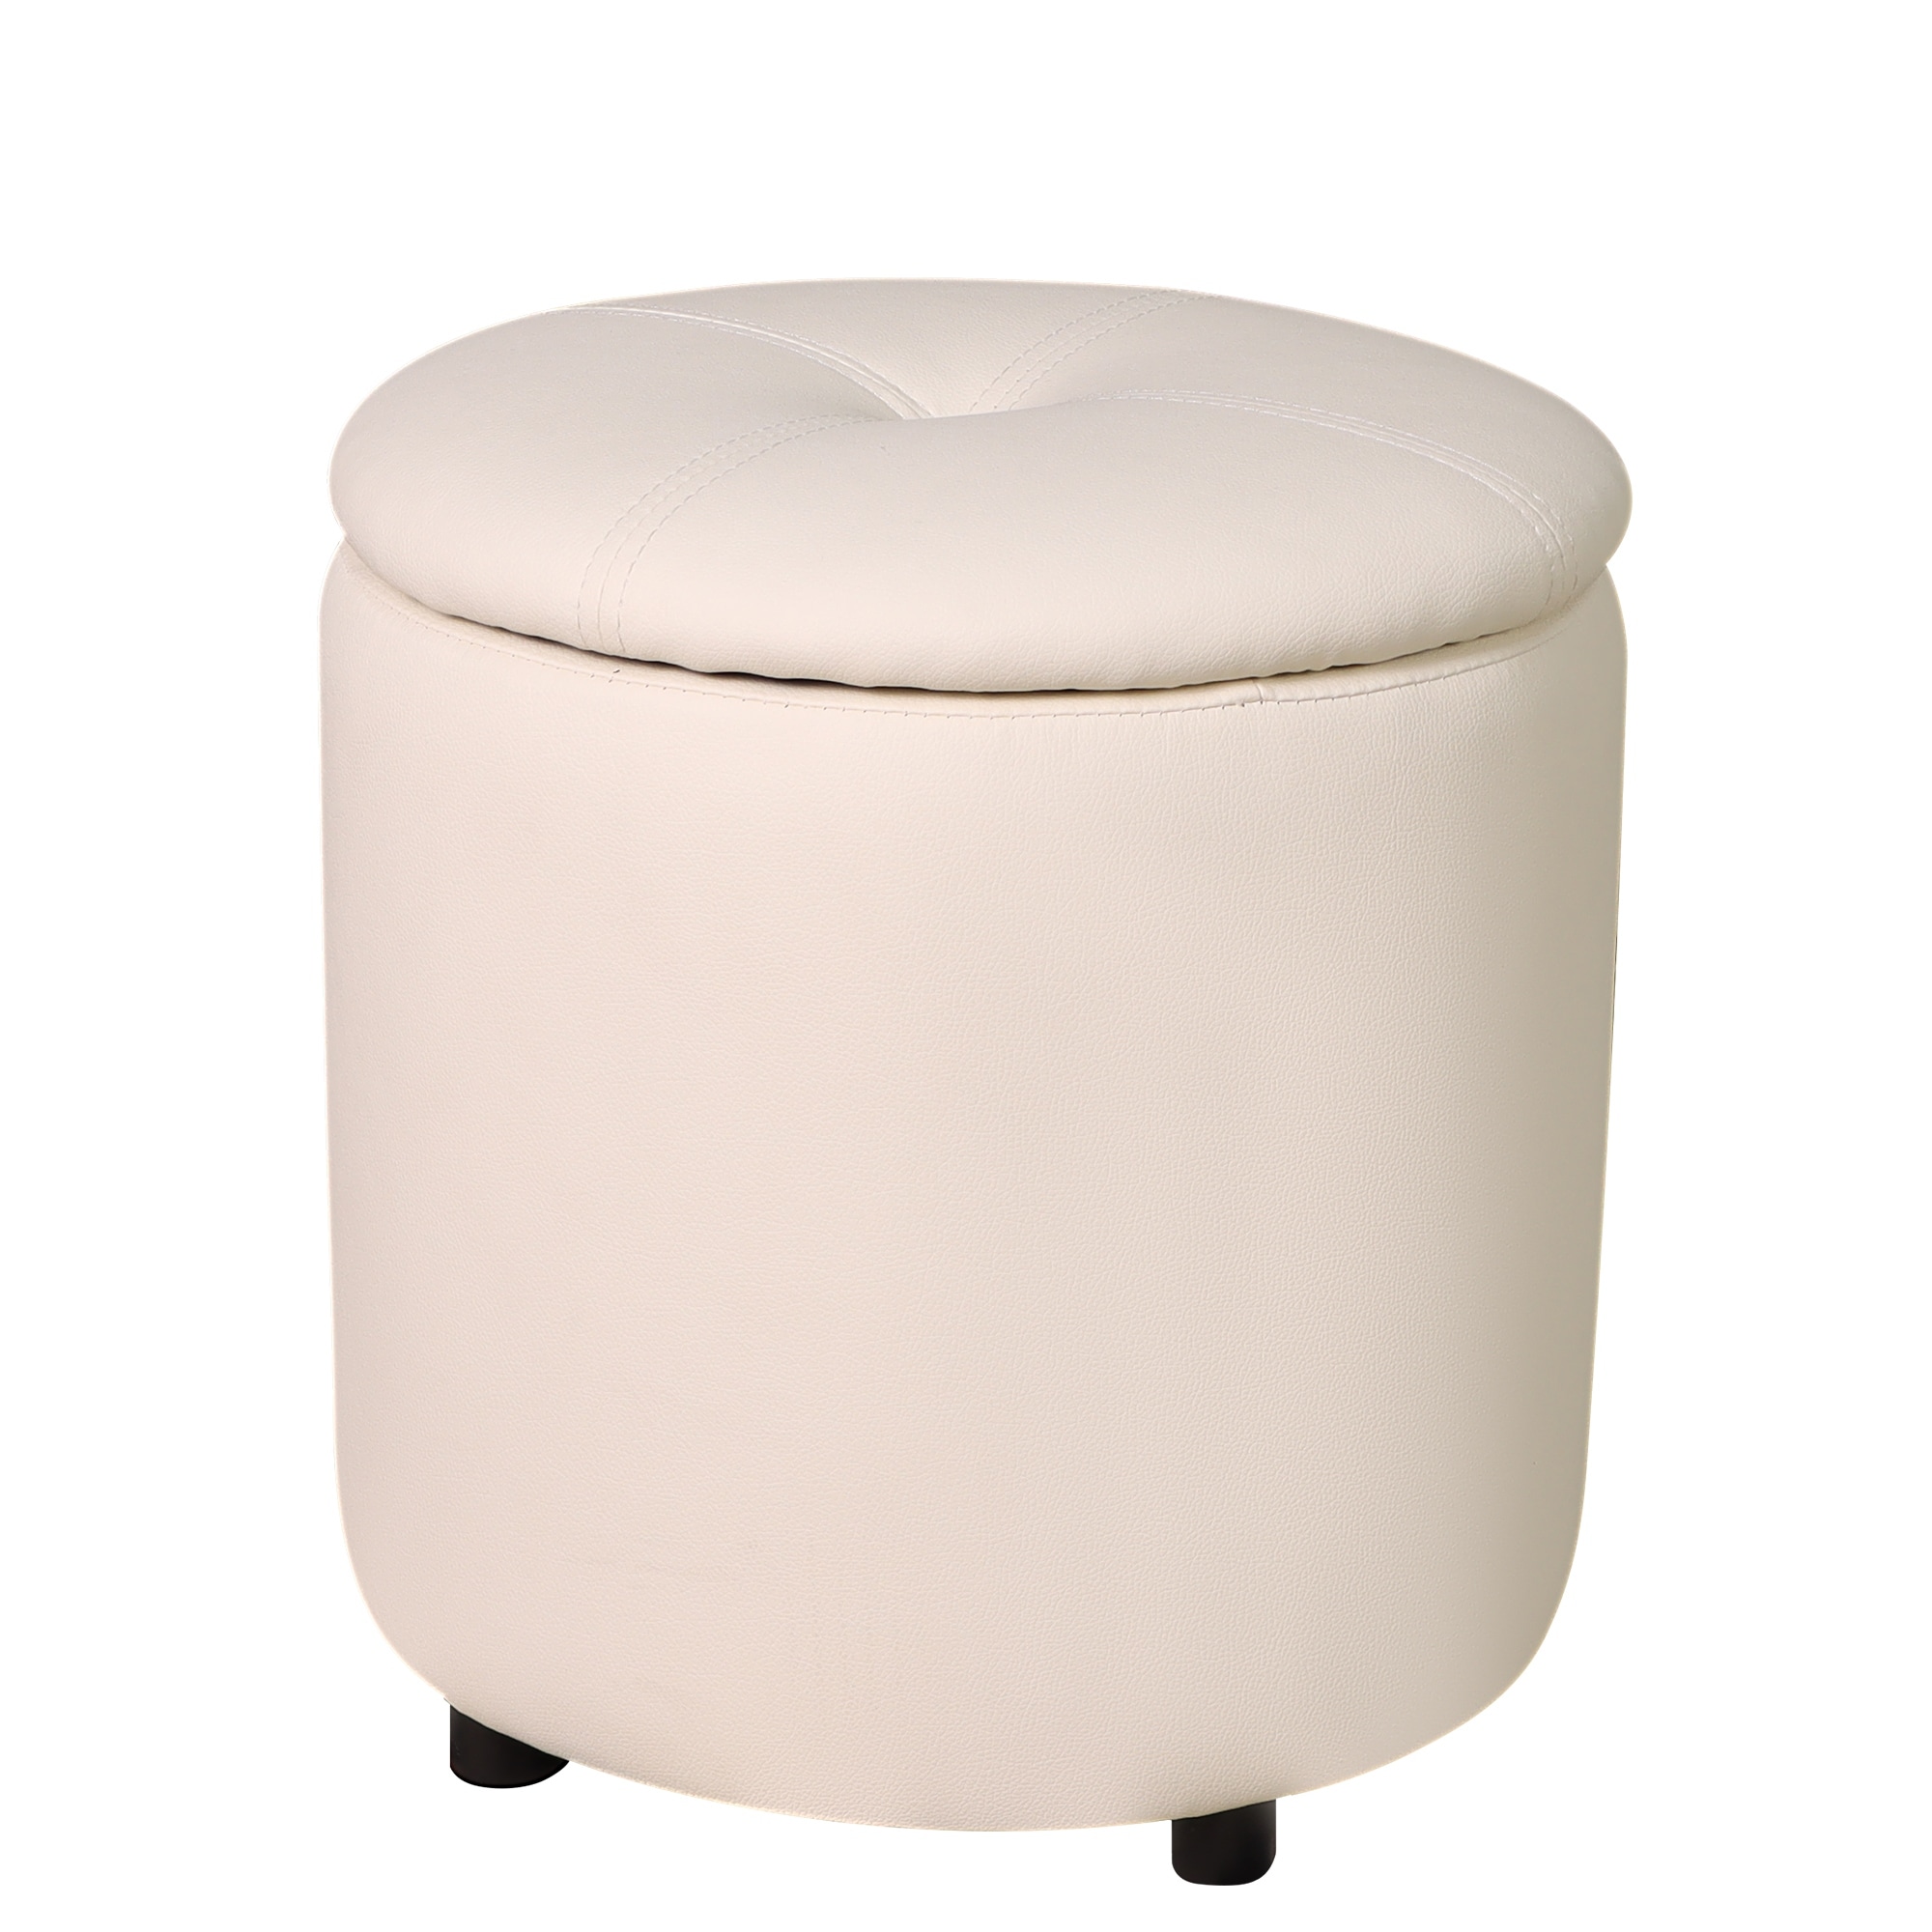 Unbranded Round Storage Ottoman Faux Leather Upholstered Footrest Stool-White